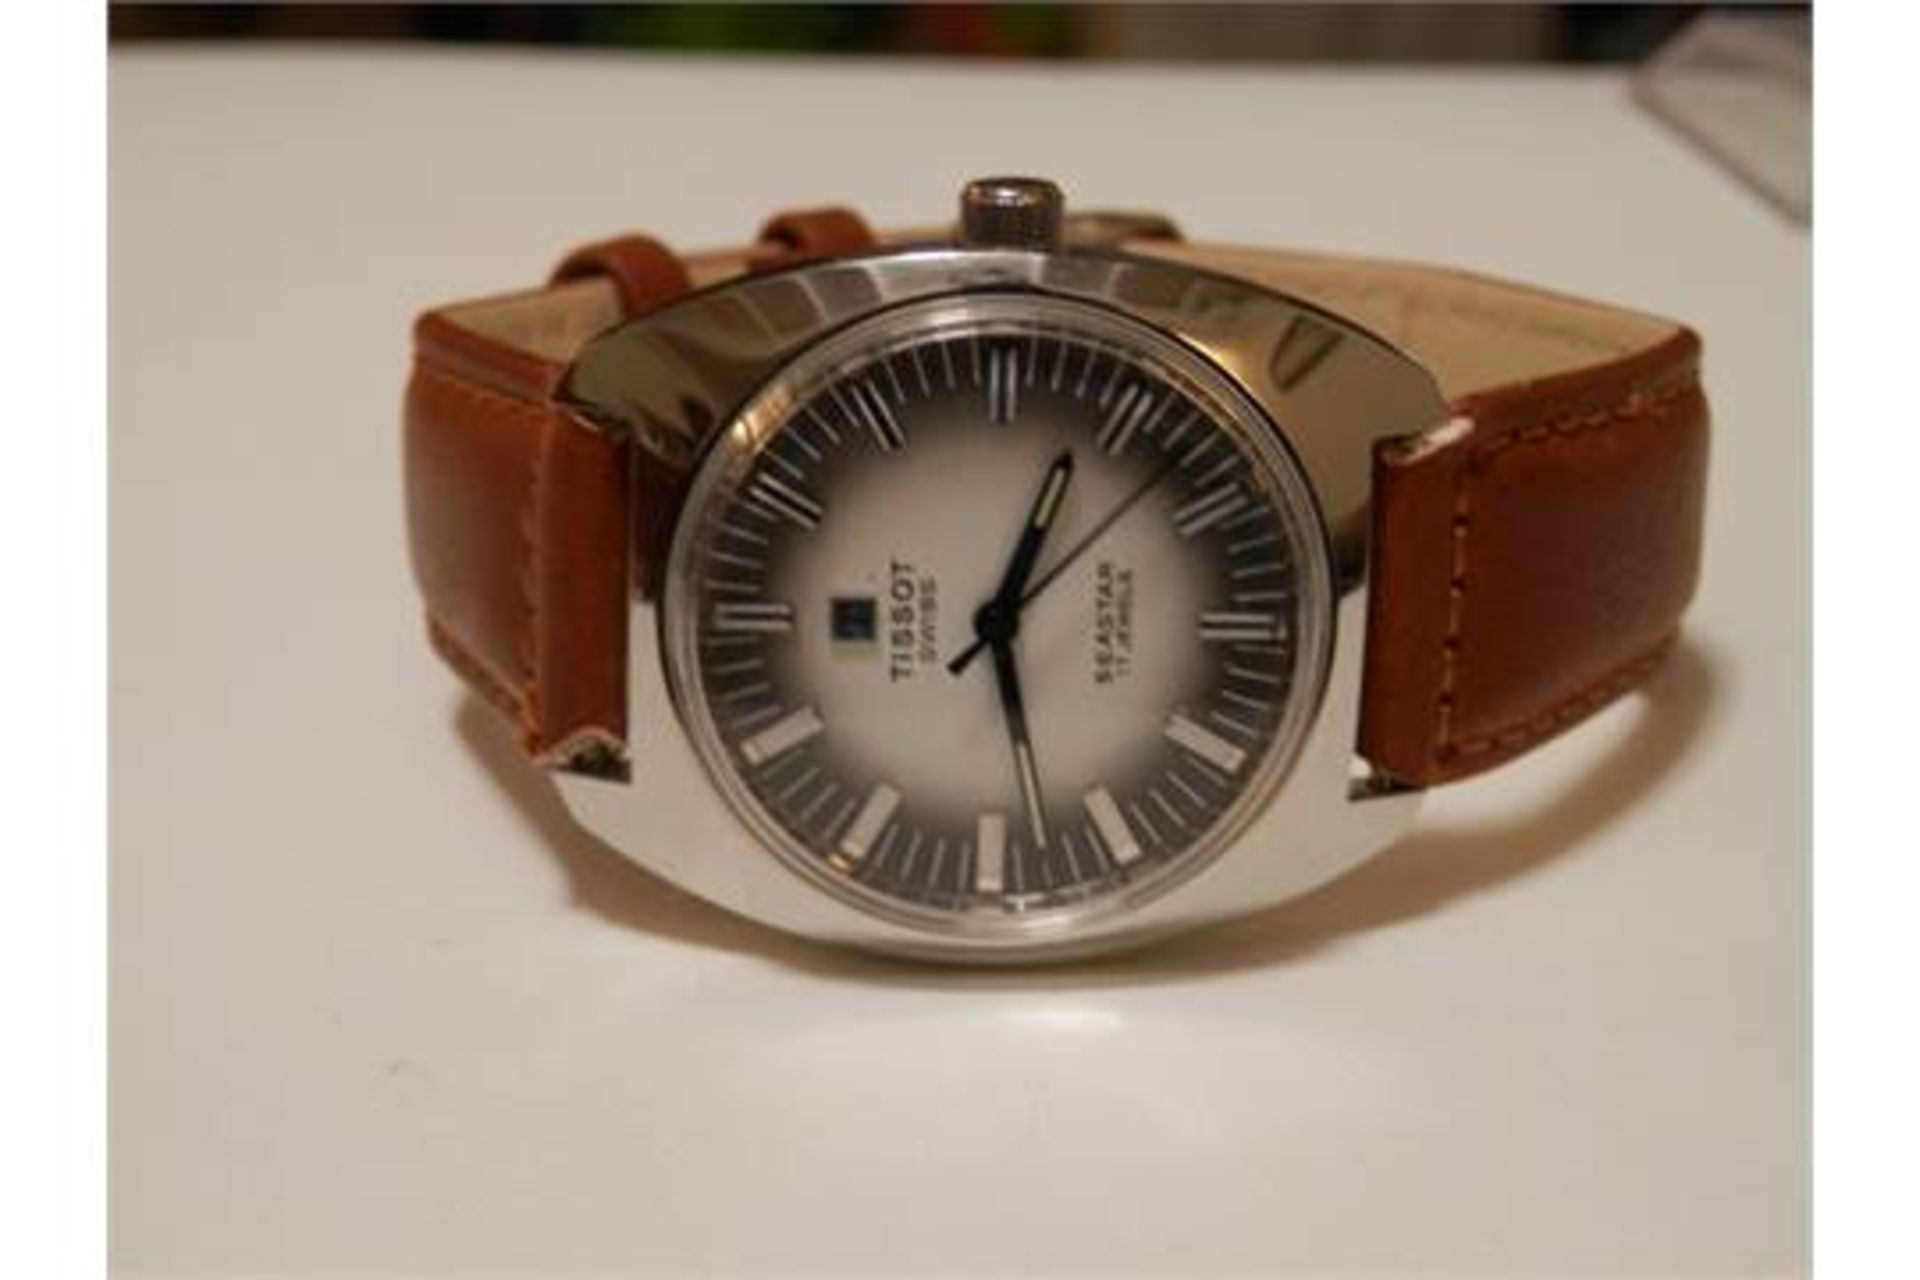 SUPERB GENTS TISSOT SEASTAR, POSSIBLY NEW/OLD STOCK 1970S 17 JEWEL SWISS WATCH (#2 of 3 available) - Image 4 of 10